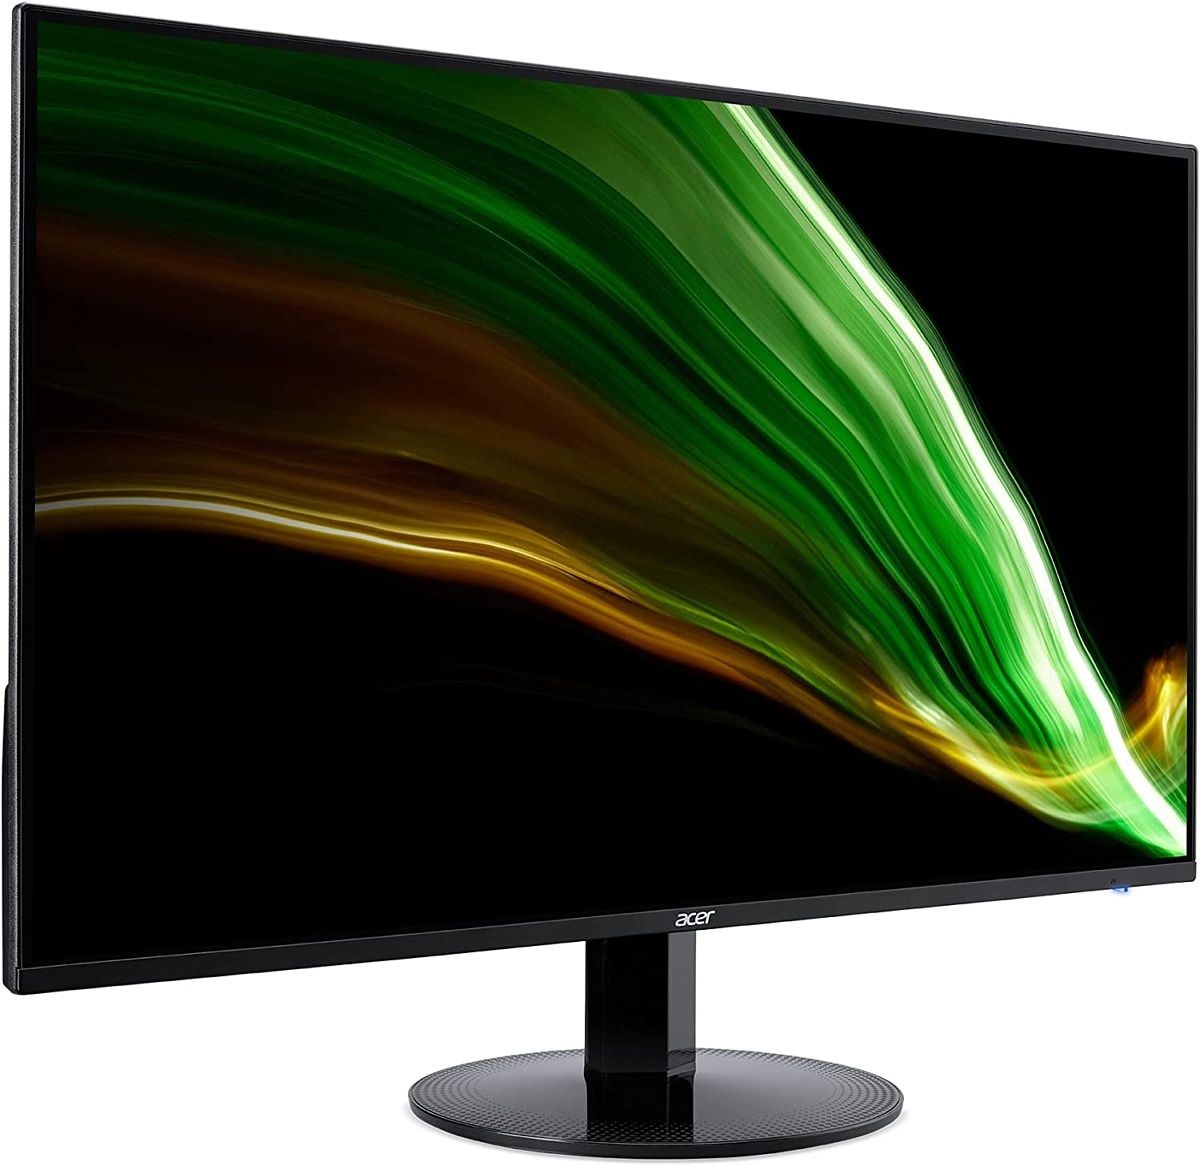 If you just want some additional screen real estate without spending too much, this Acer monitor may do the trick. This 24-inch panel comes in Full HD resolution, and it has a 75Hz refresh rate to give you a slightly smoother-feeling experience. It's not a very fancy monitor, but it gets the job done for a very low price, and it may be a good idea to see if dual monitors work well for you.